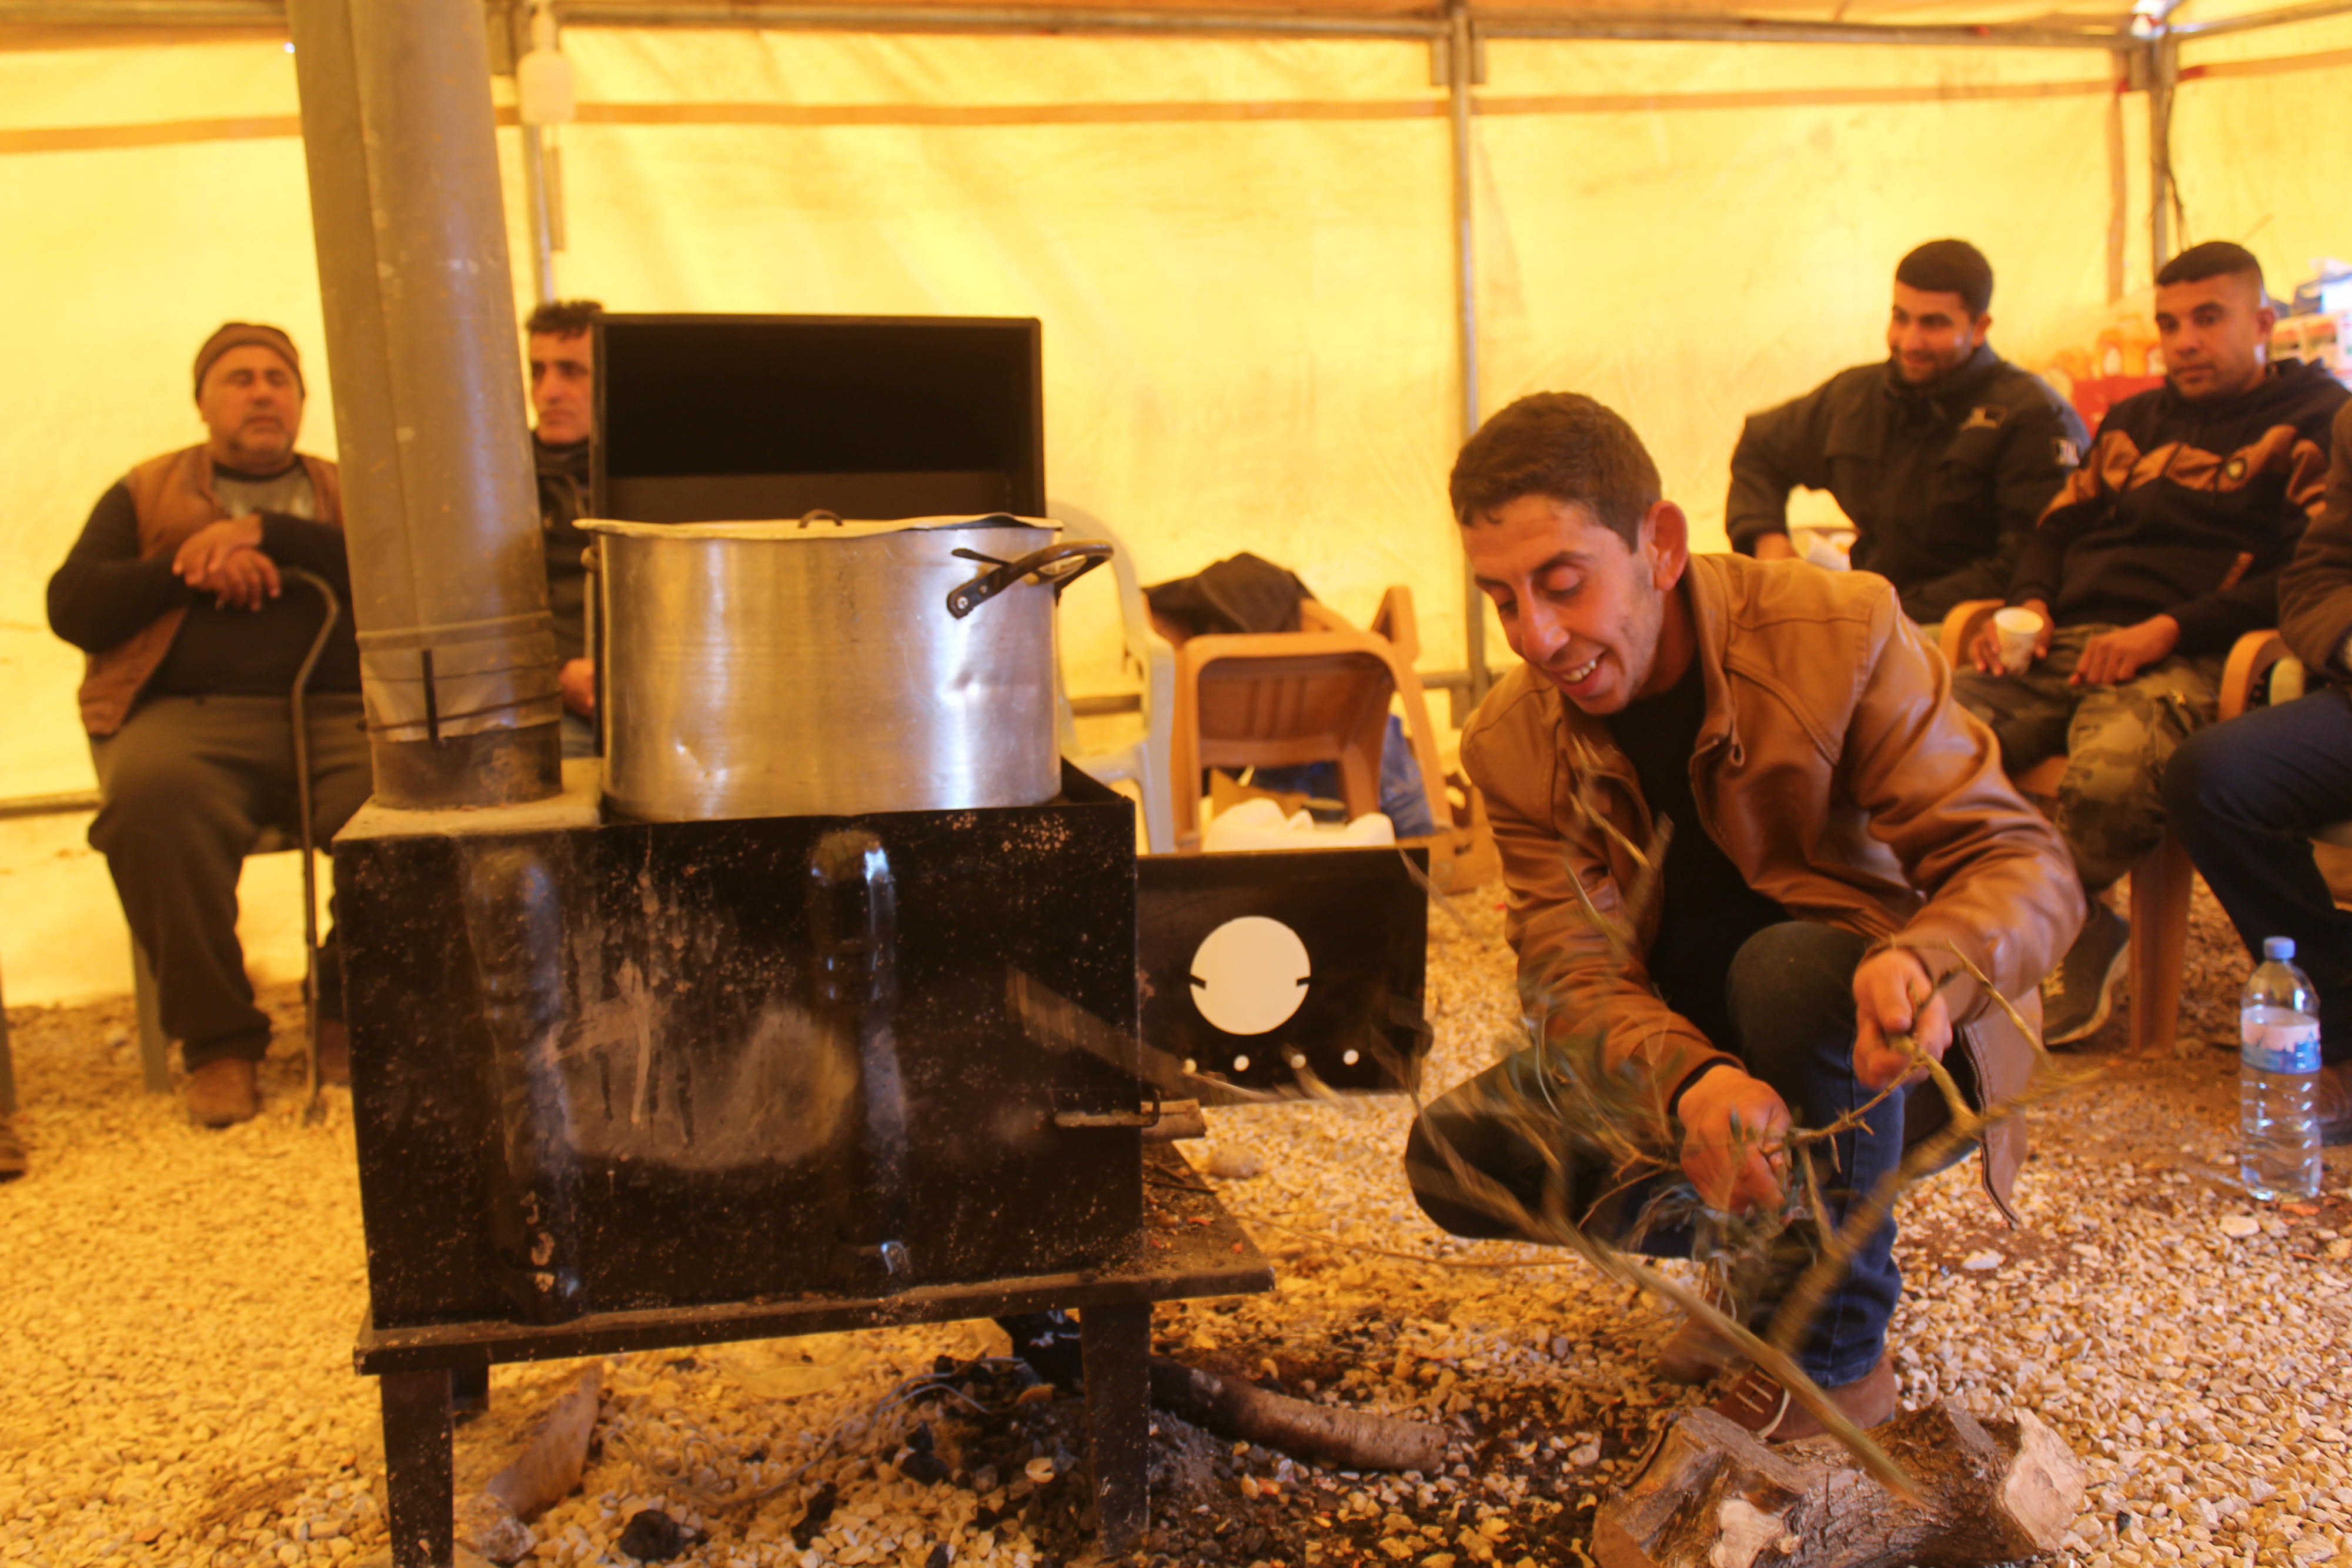 Inside the tent, volunteers make Freekeh soup, a popular Palestinian food usually prepared in the winter as it provides the body with energy and warmth (MEE/Shatha Hammad)